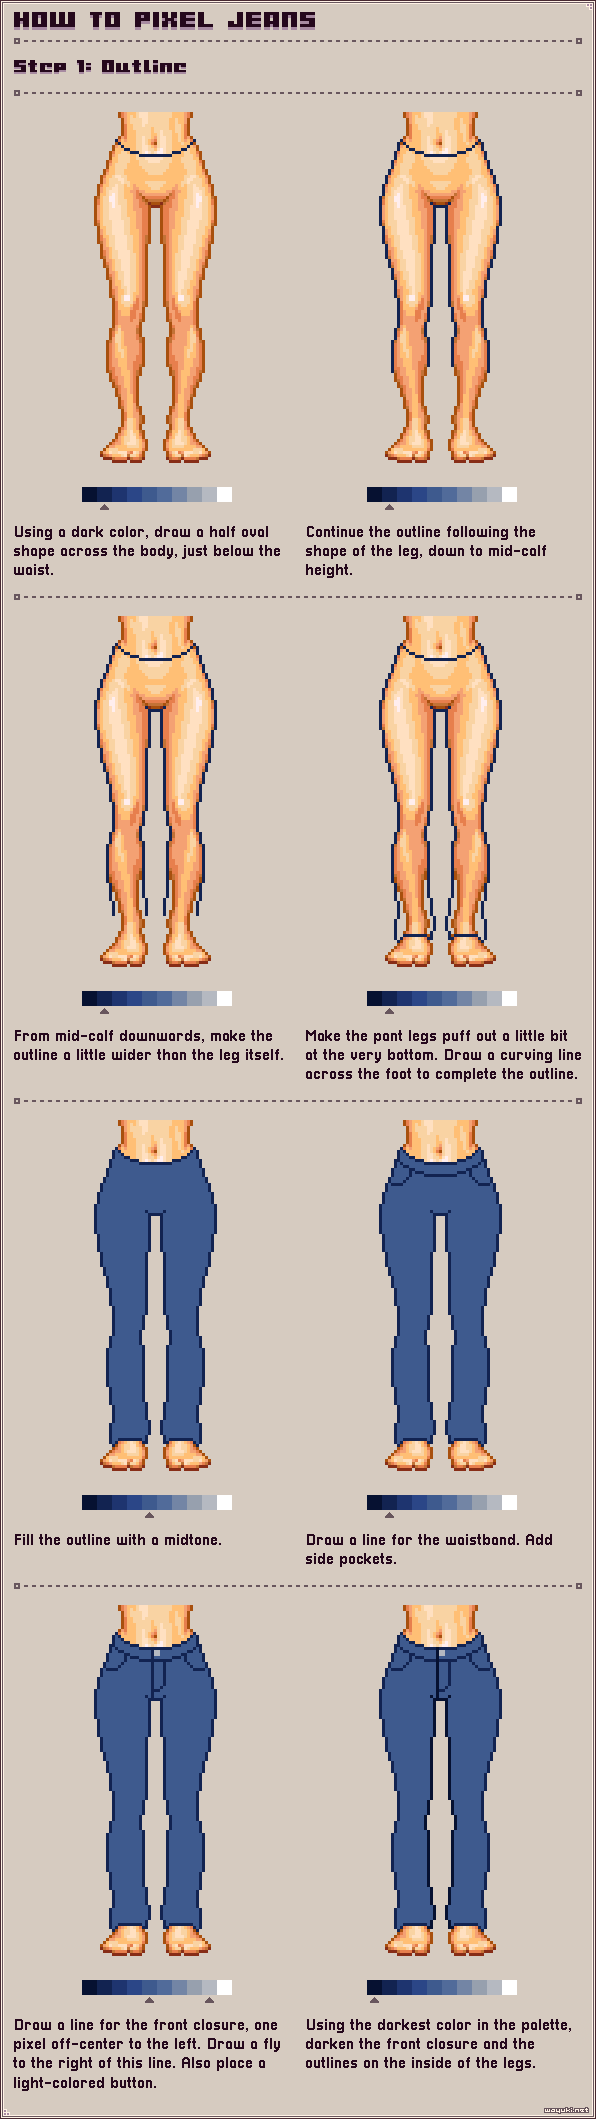 How to pixel jeans step 1